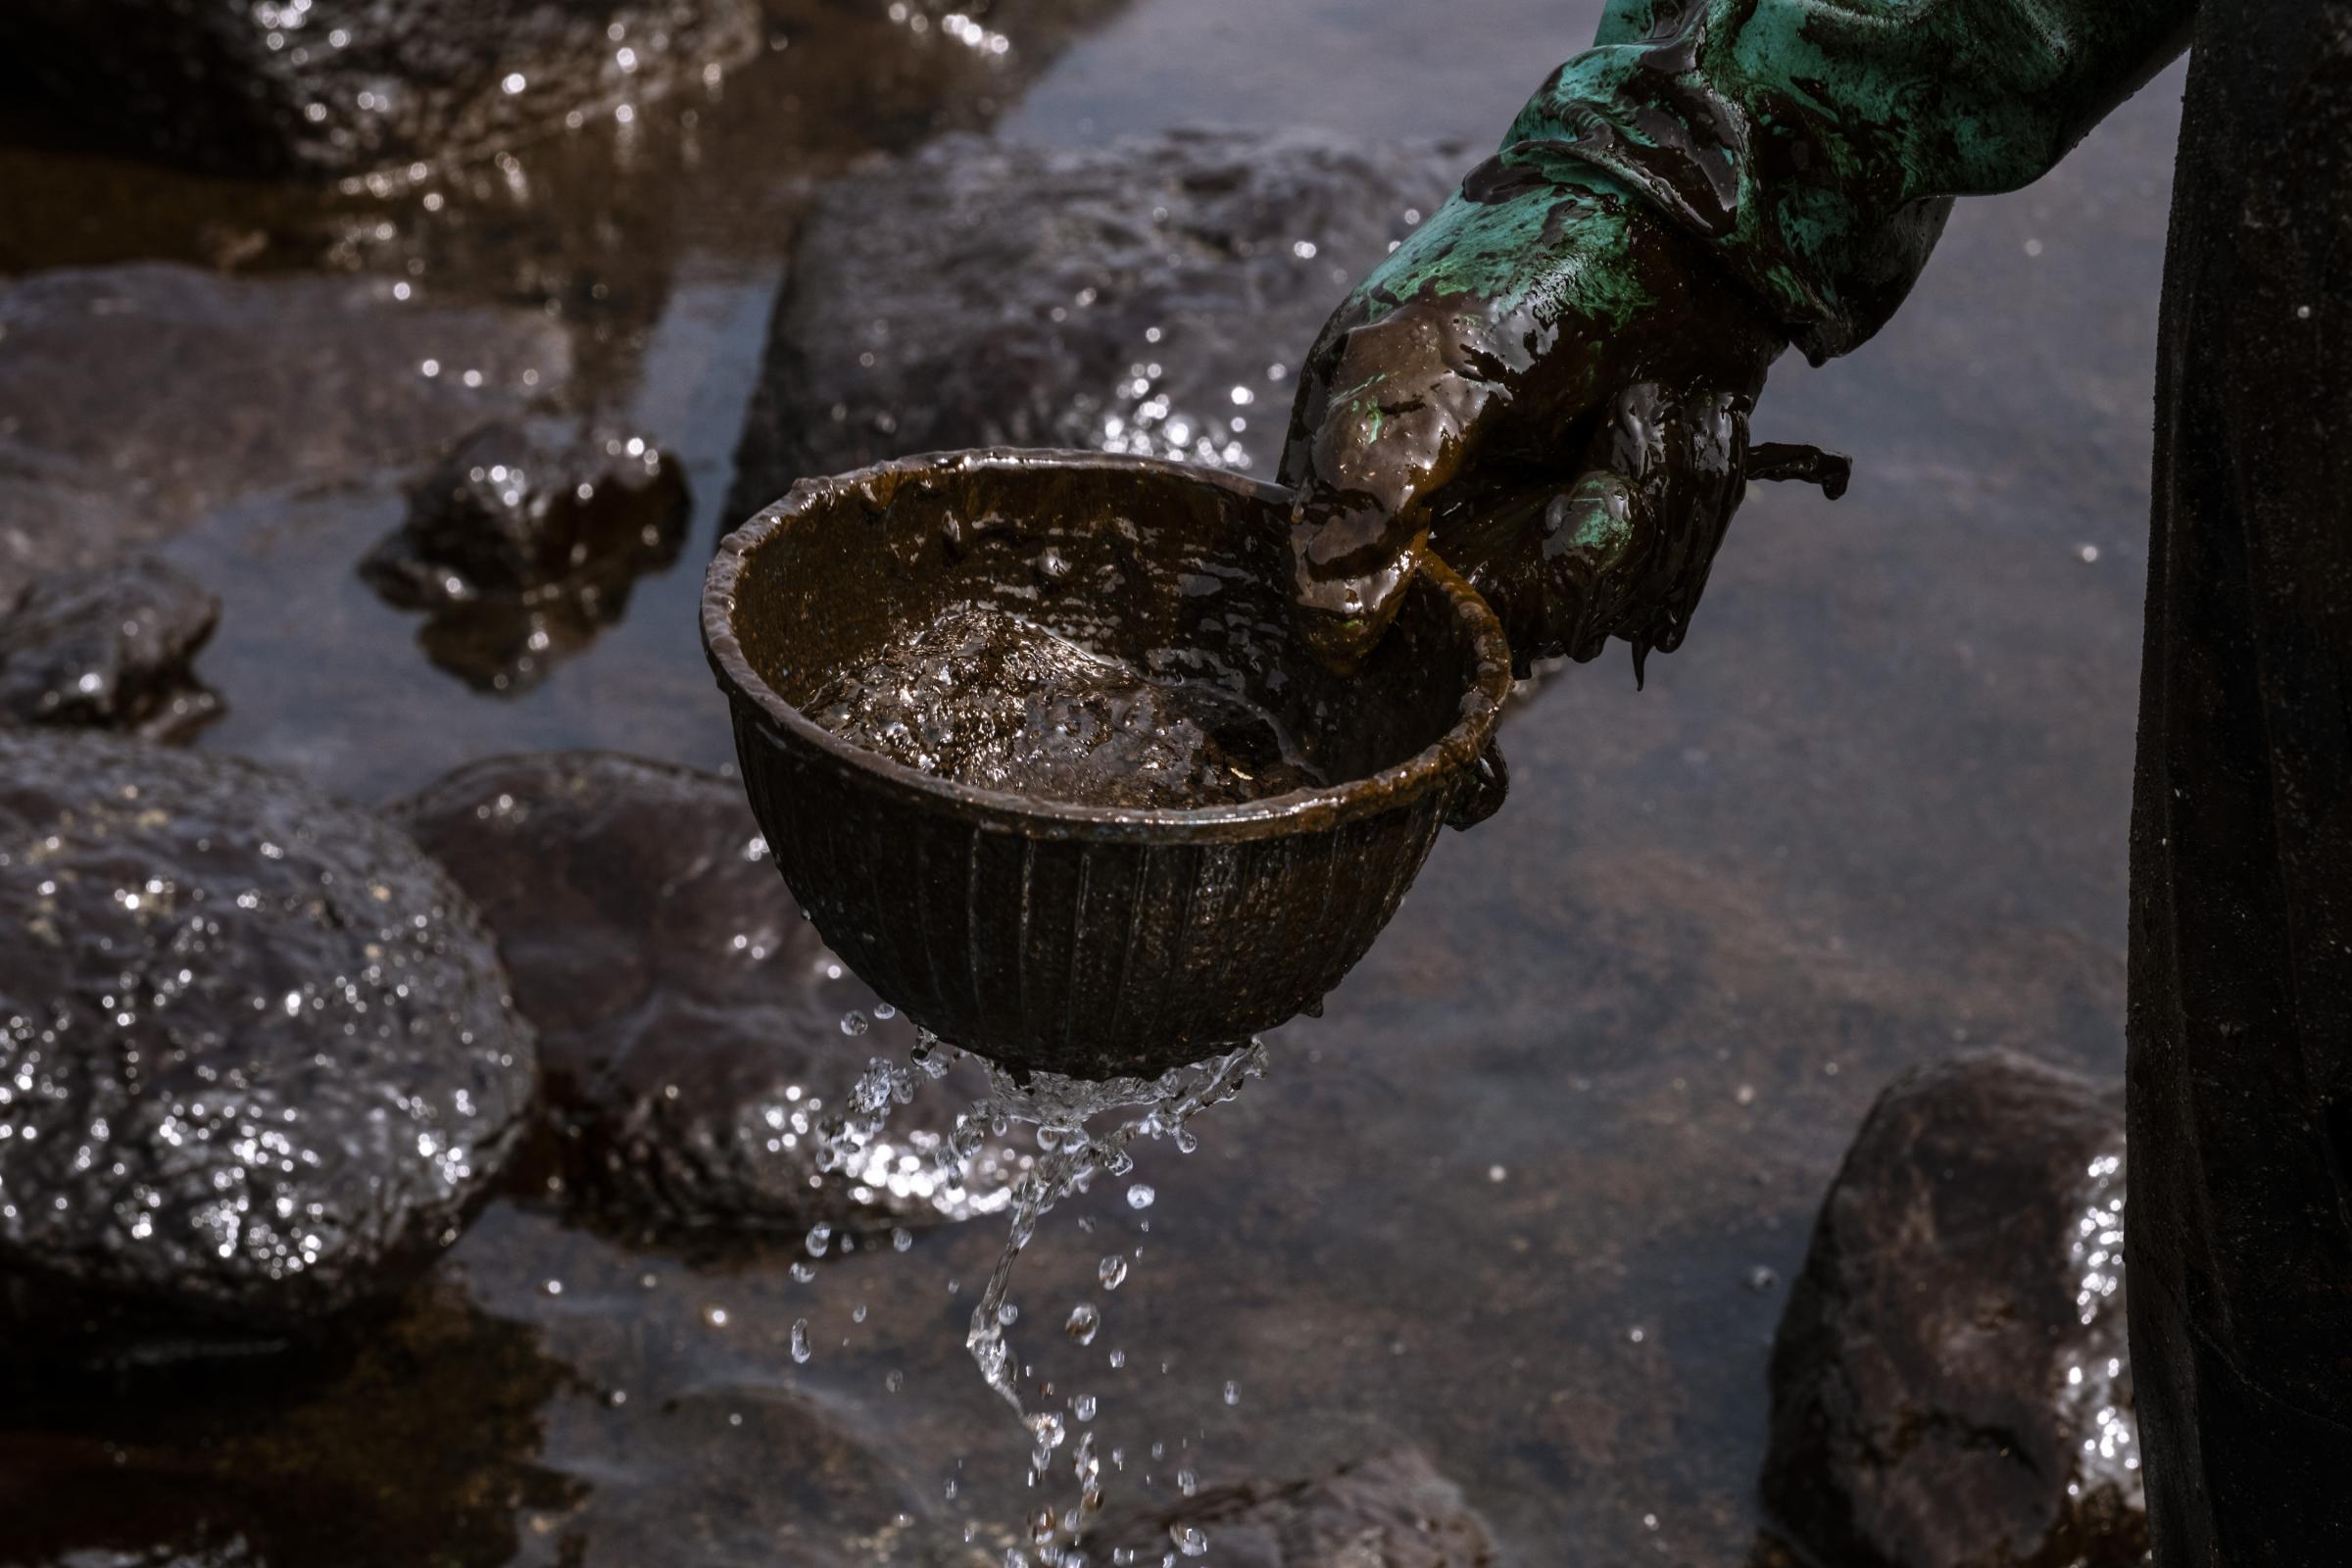 The oil spill in Peru - The oil is recovered with shovels, brushes and buckets.